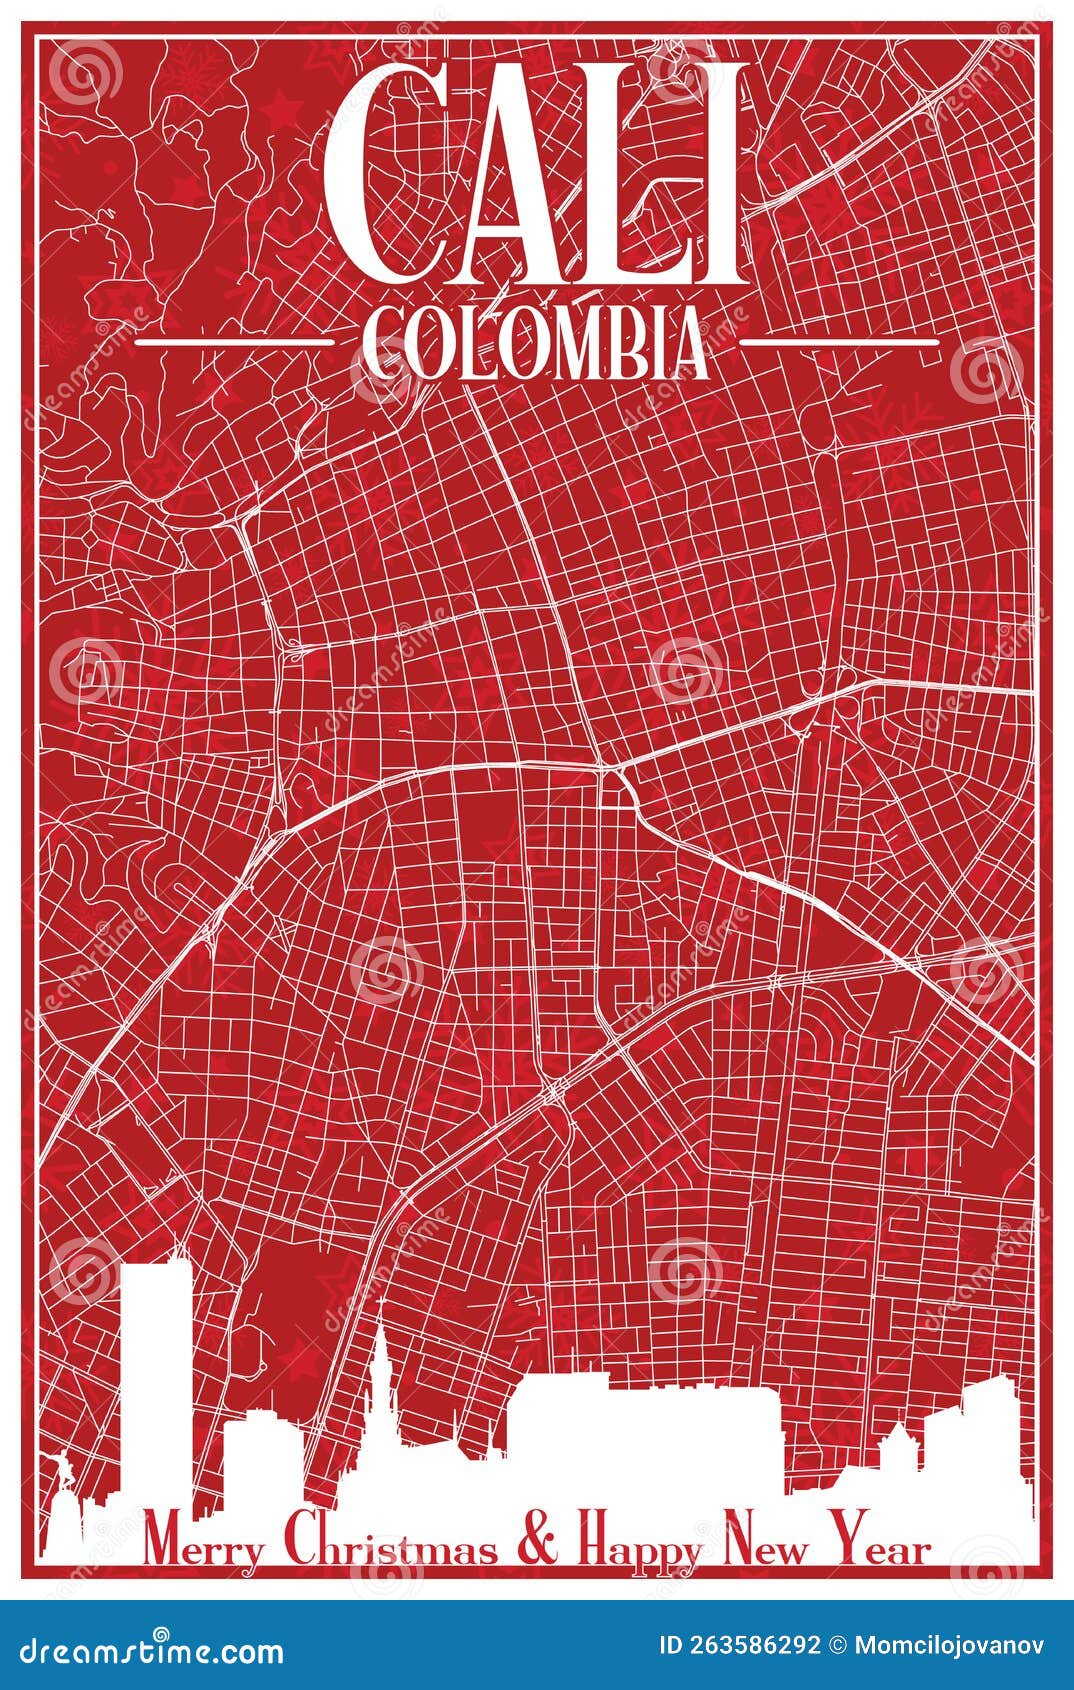 Christmas Postcard of the Downtown CALI, COLOMBIA Stock Vector